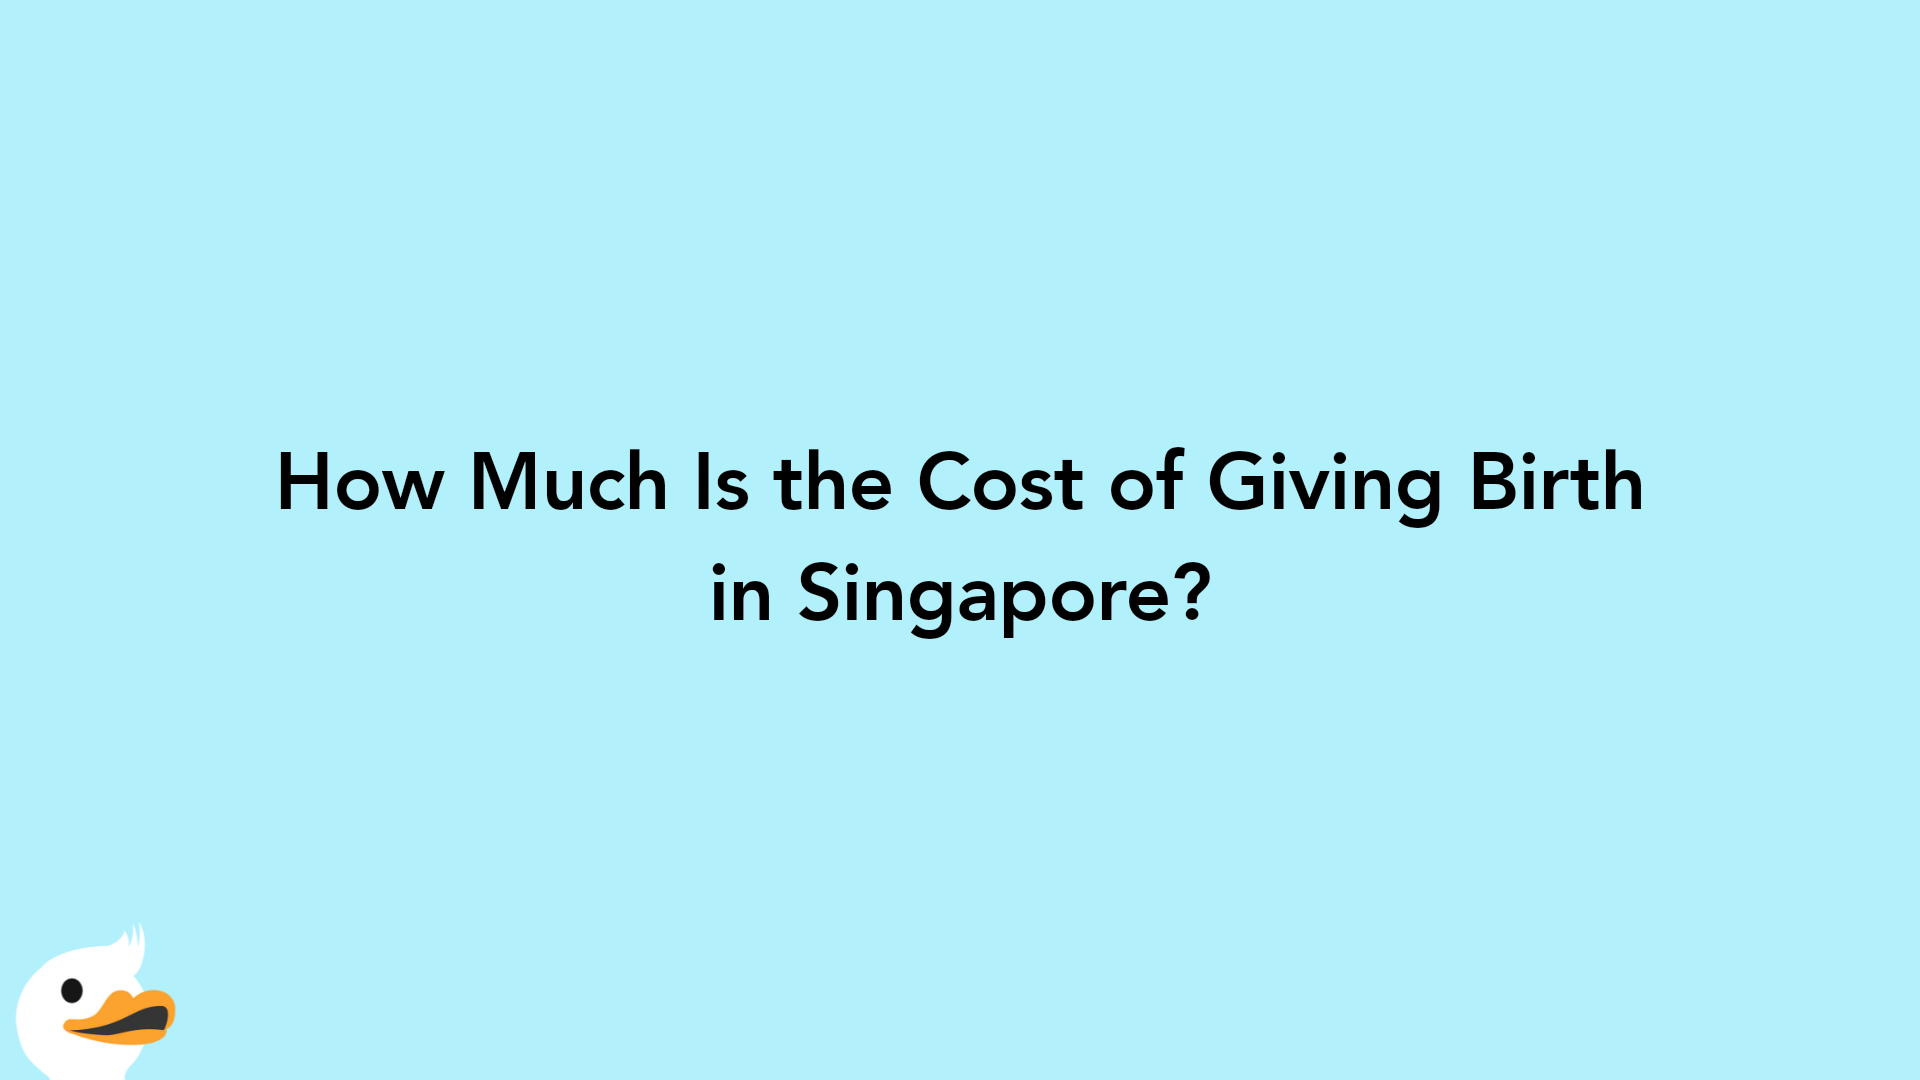 How Much Is the Cost of Giving Birth in Singapore?